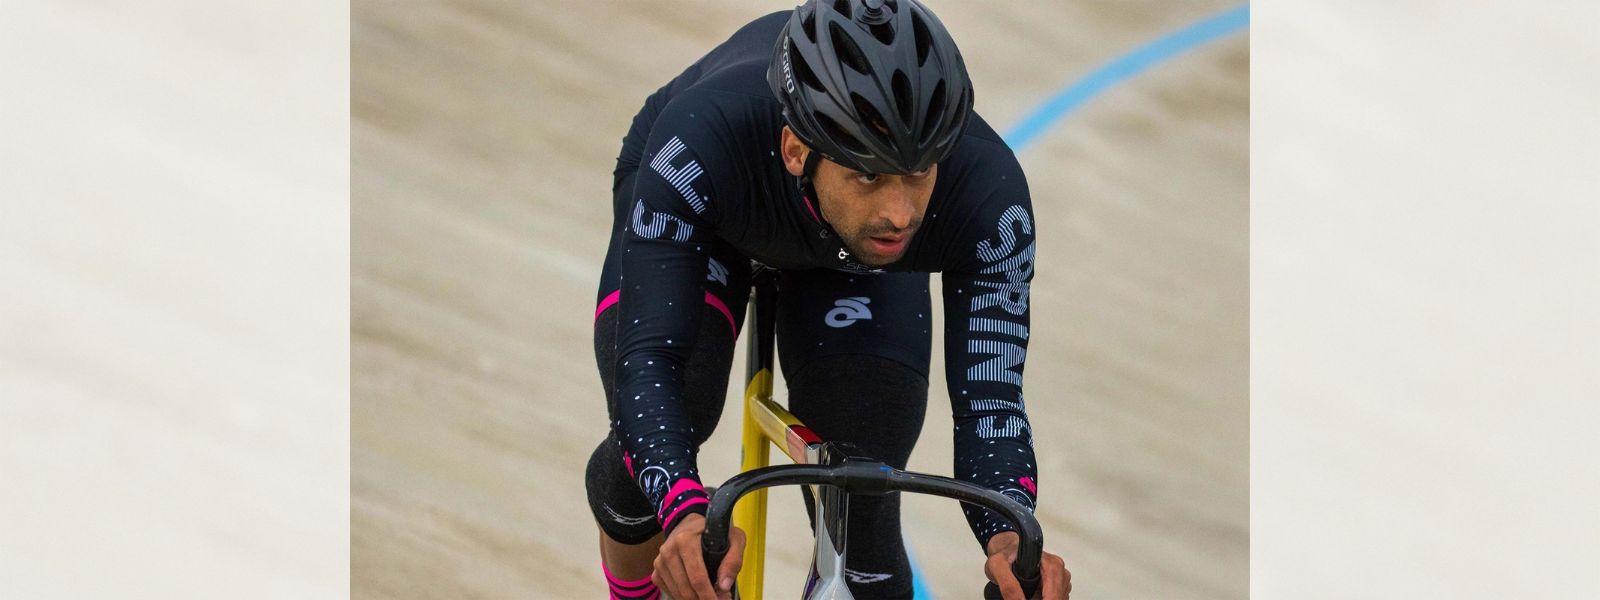 Cycling world record holder dies in collision